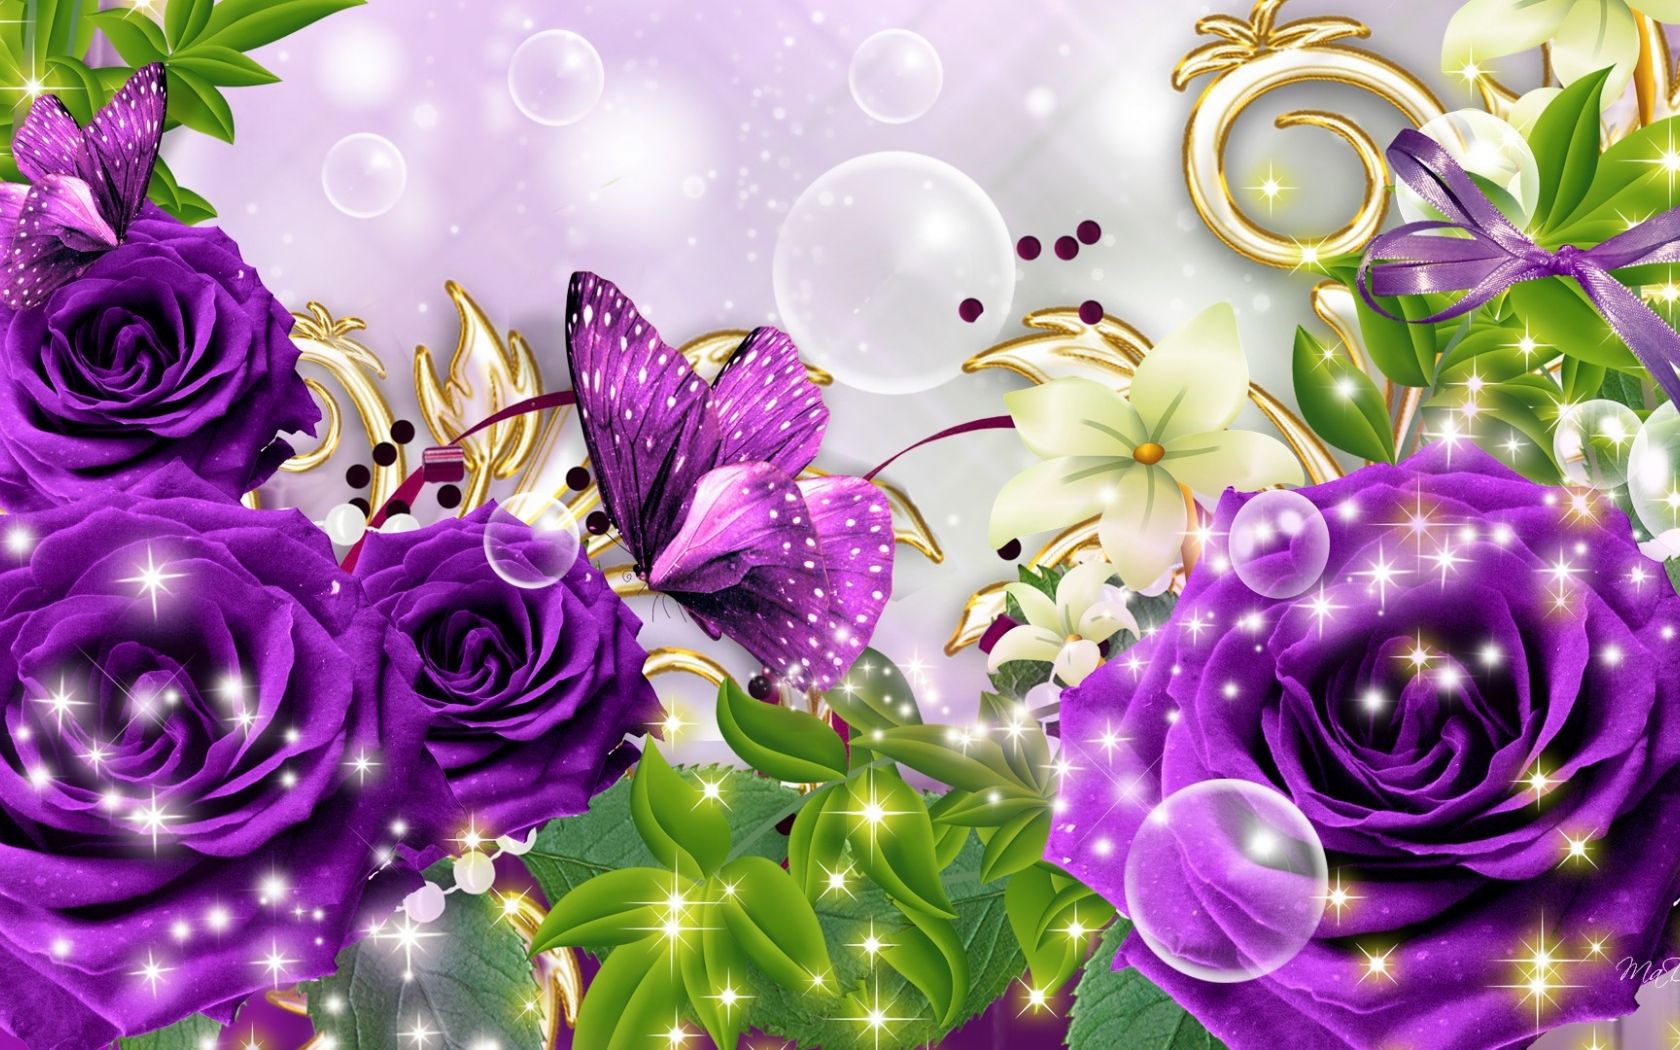 Free download 1920x1080px Roses and Butterfly Wallpaper Border